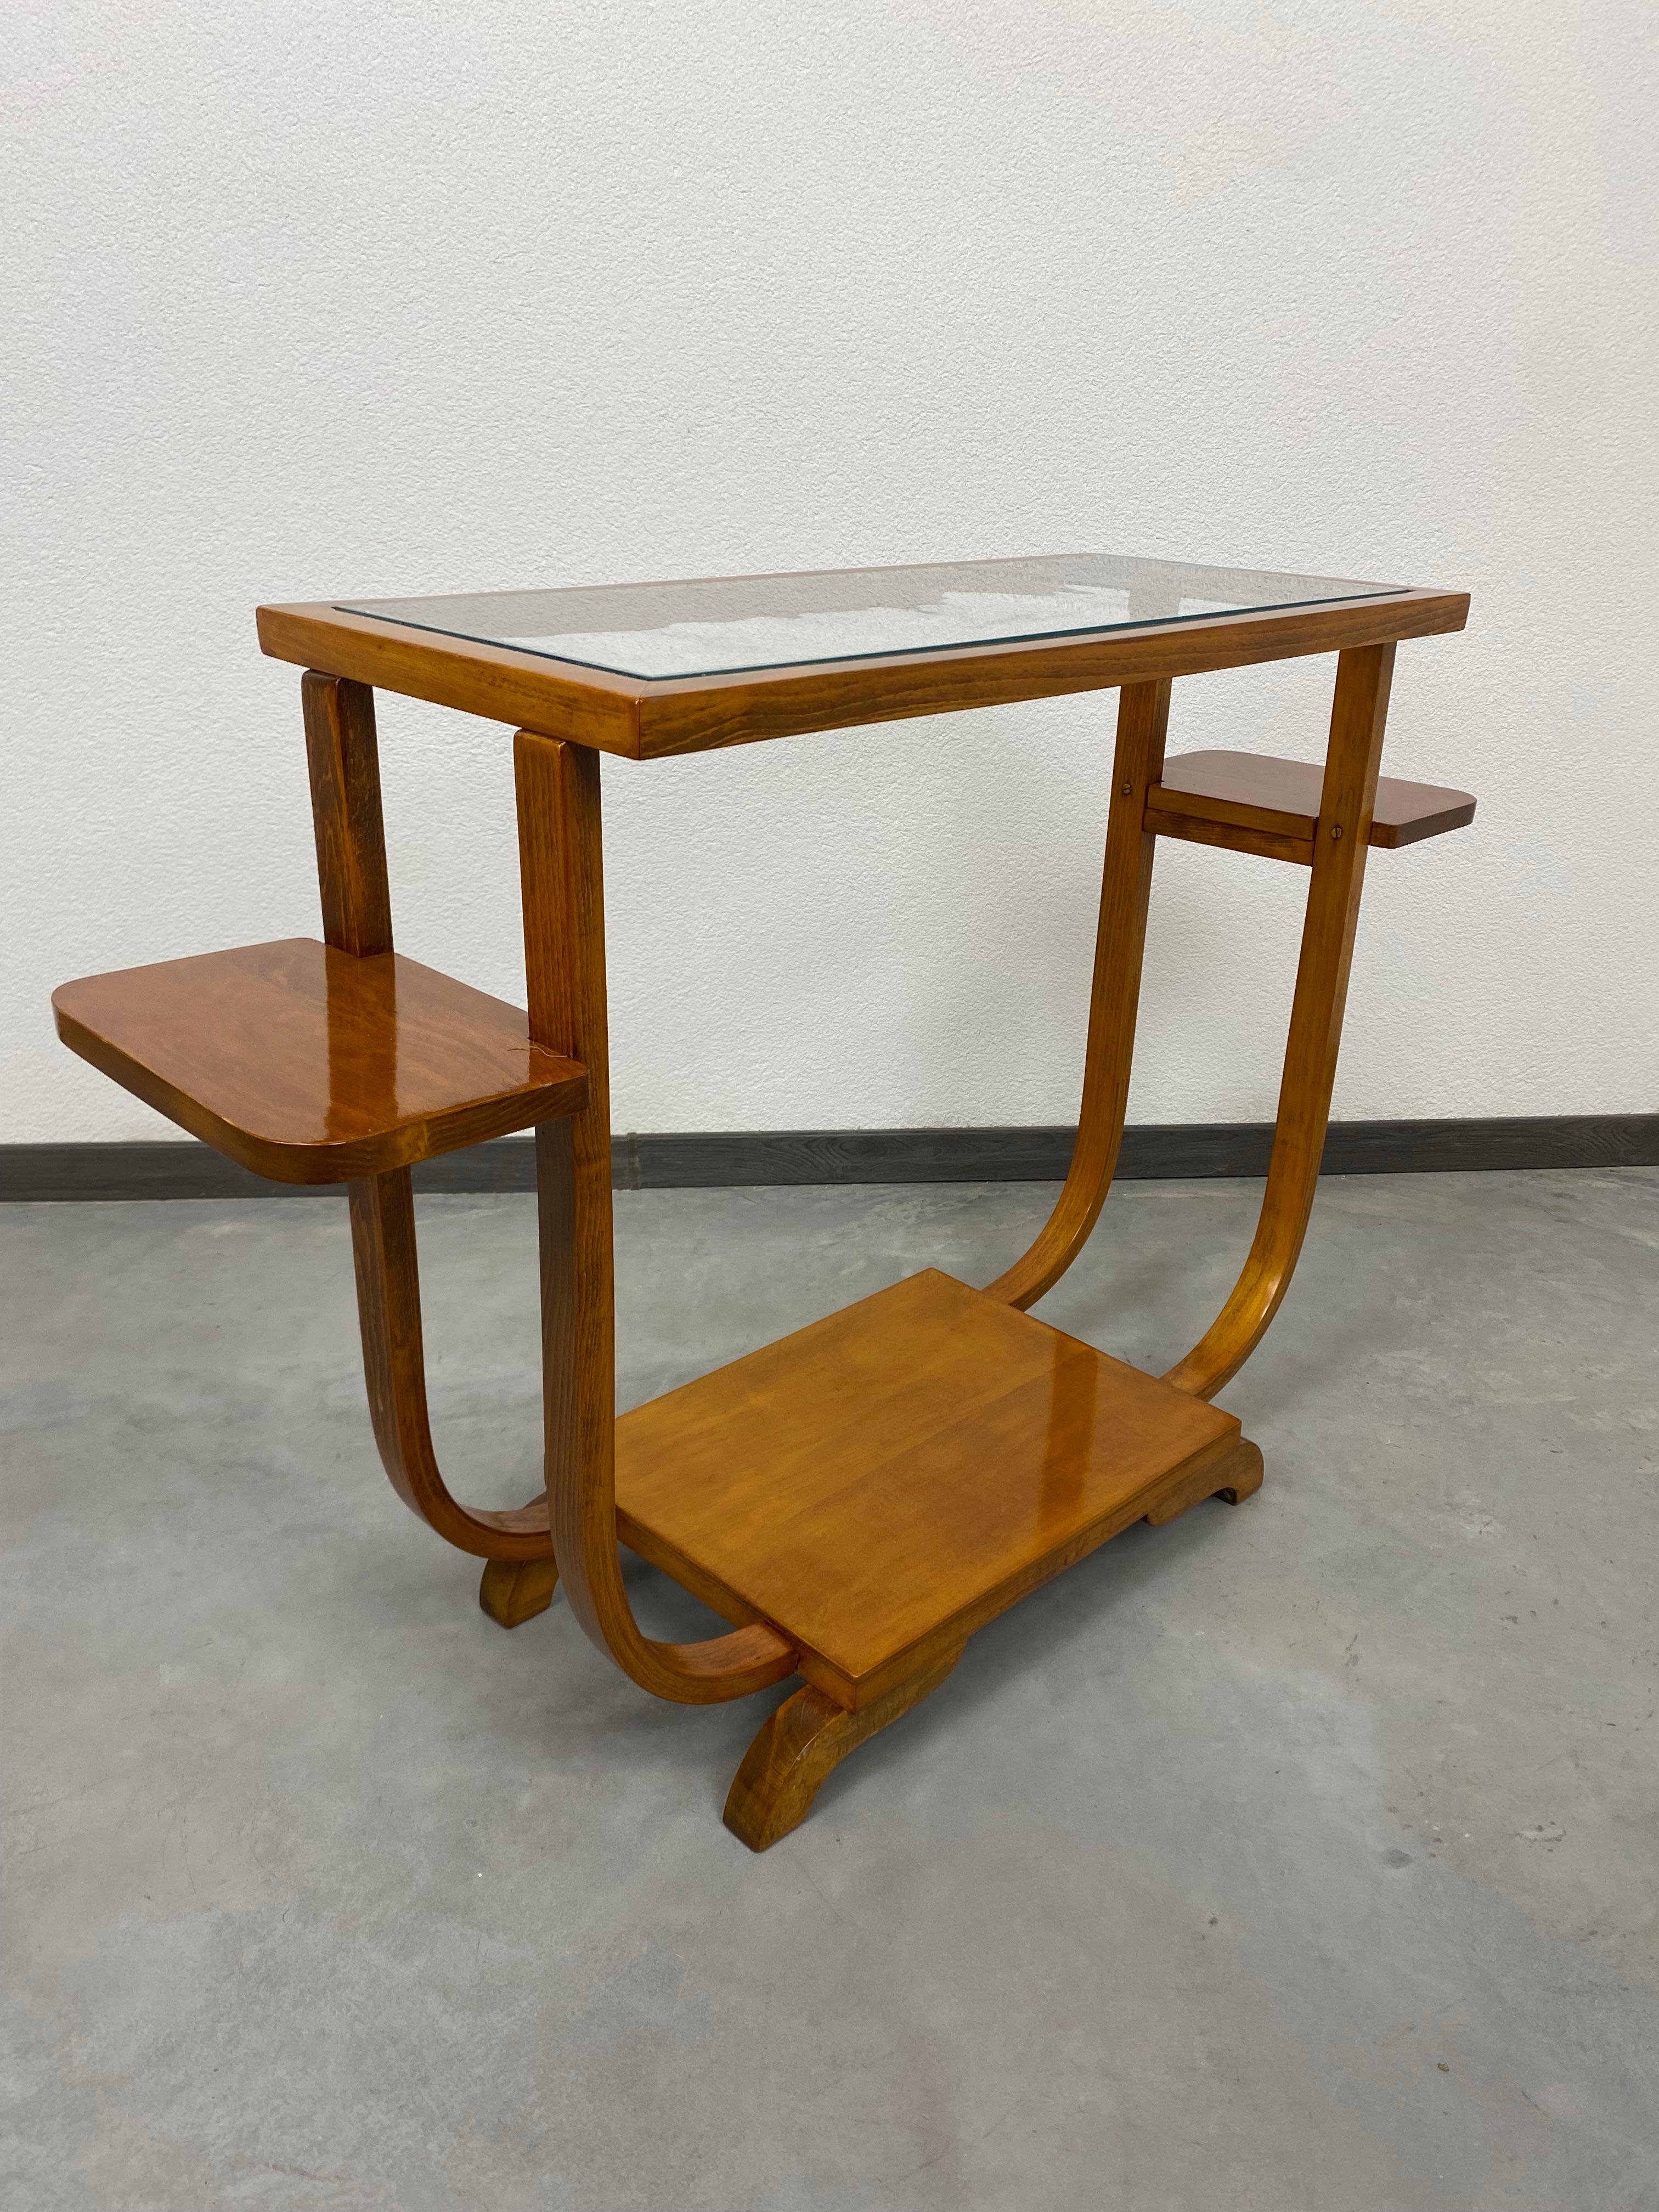 Hungarian Art Deco Side Table by Thonet Debrecsen